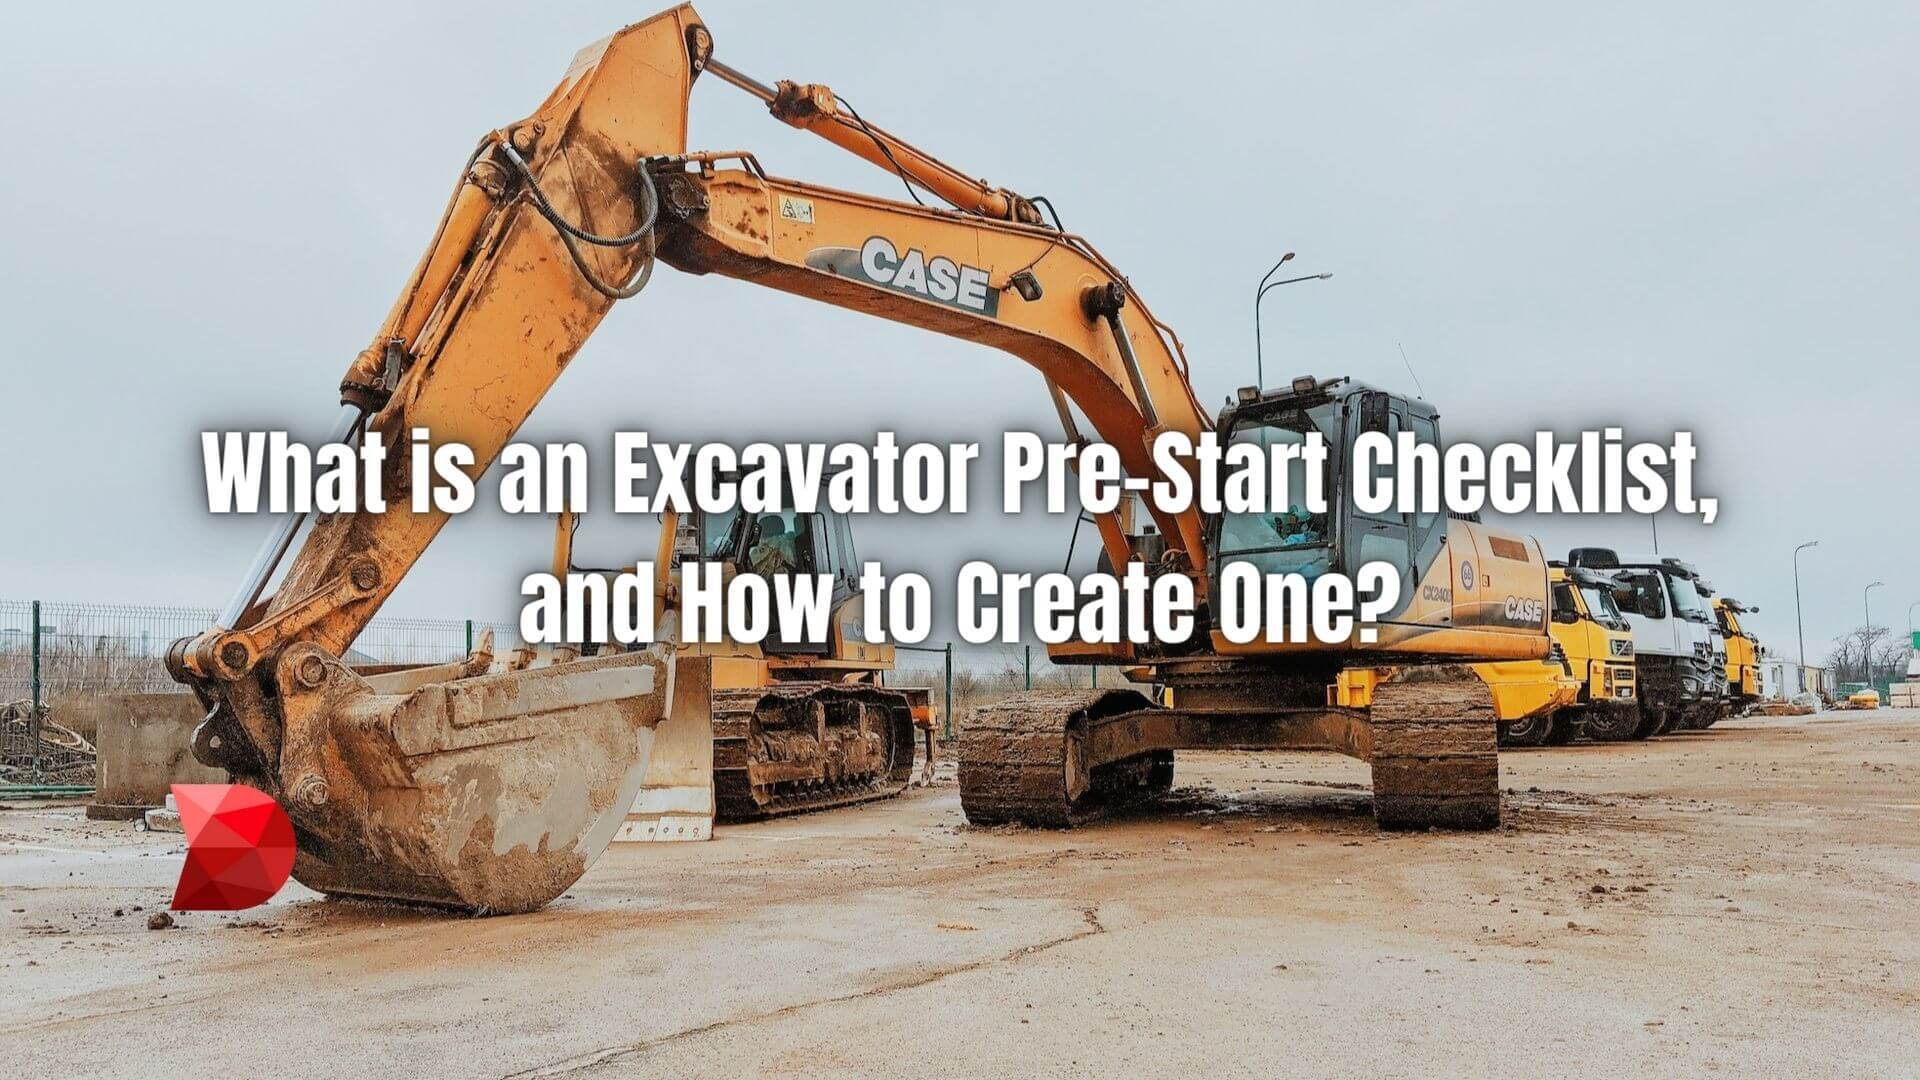 An Excavator Pre-start Checklist is used by operators to inspect the condition of an excavator unit before operating. Here's how to make one!